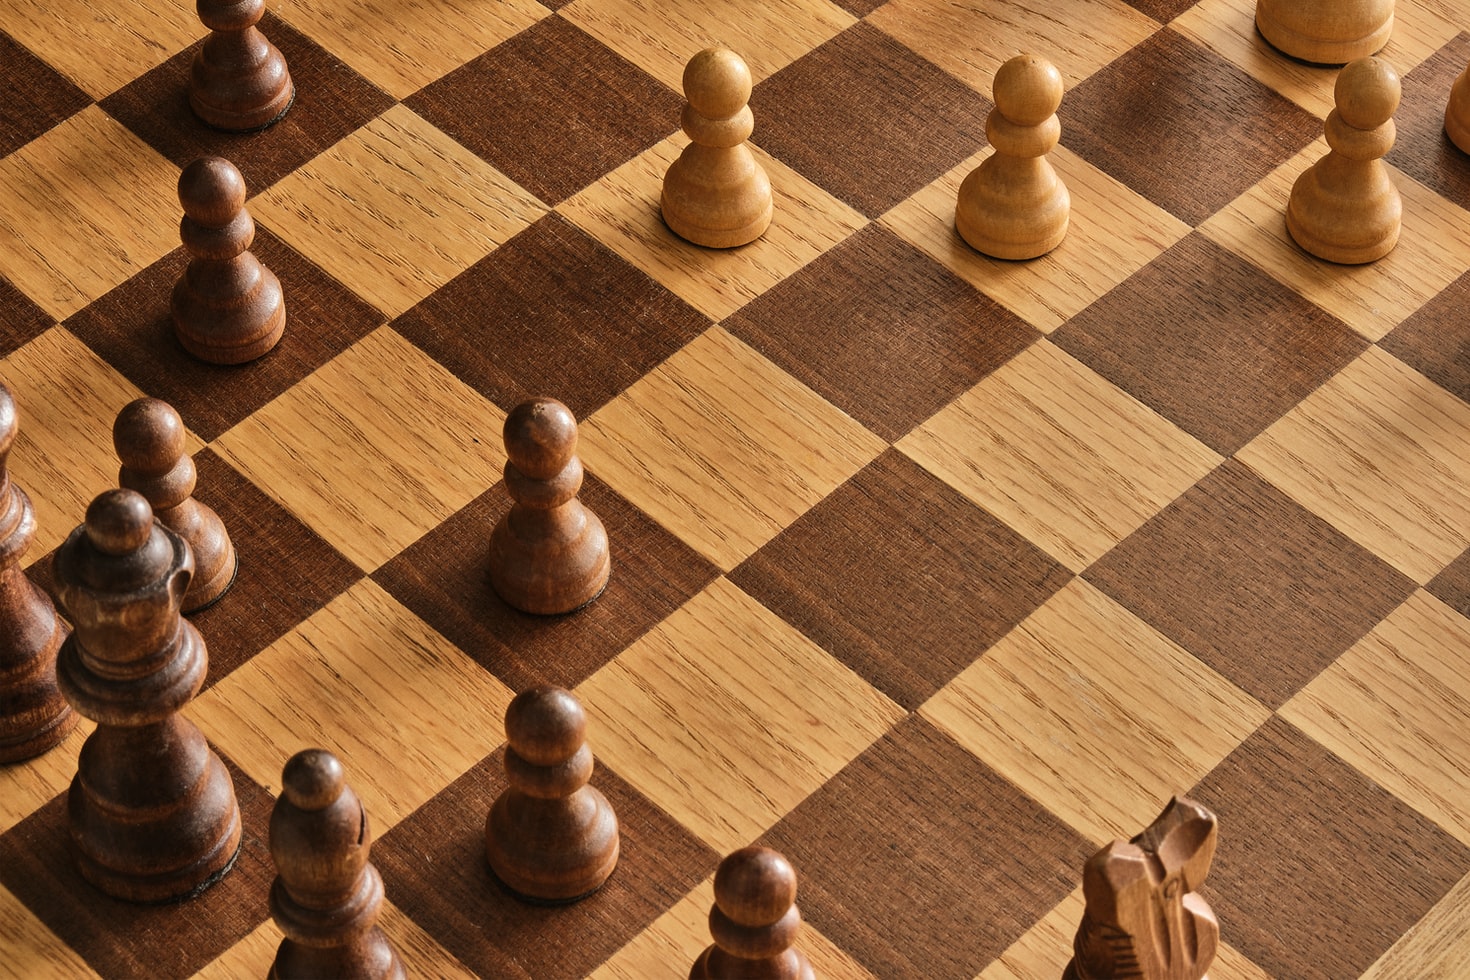 How To Defend In Chess?: The 7 Divine Principles Of Defense